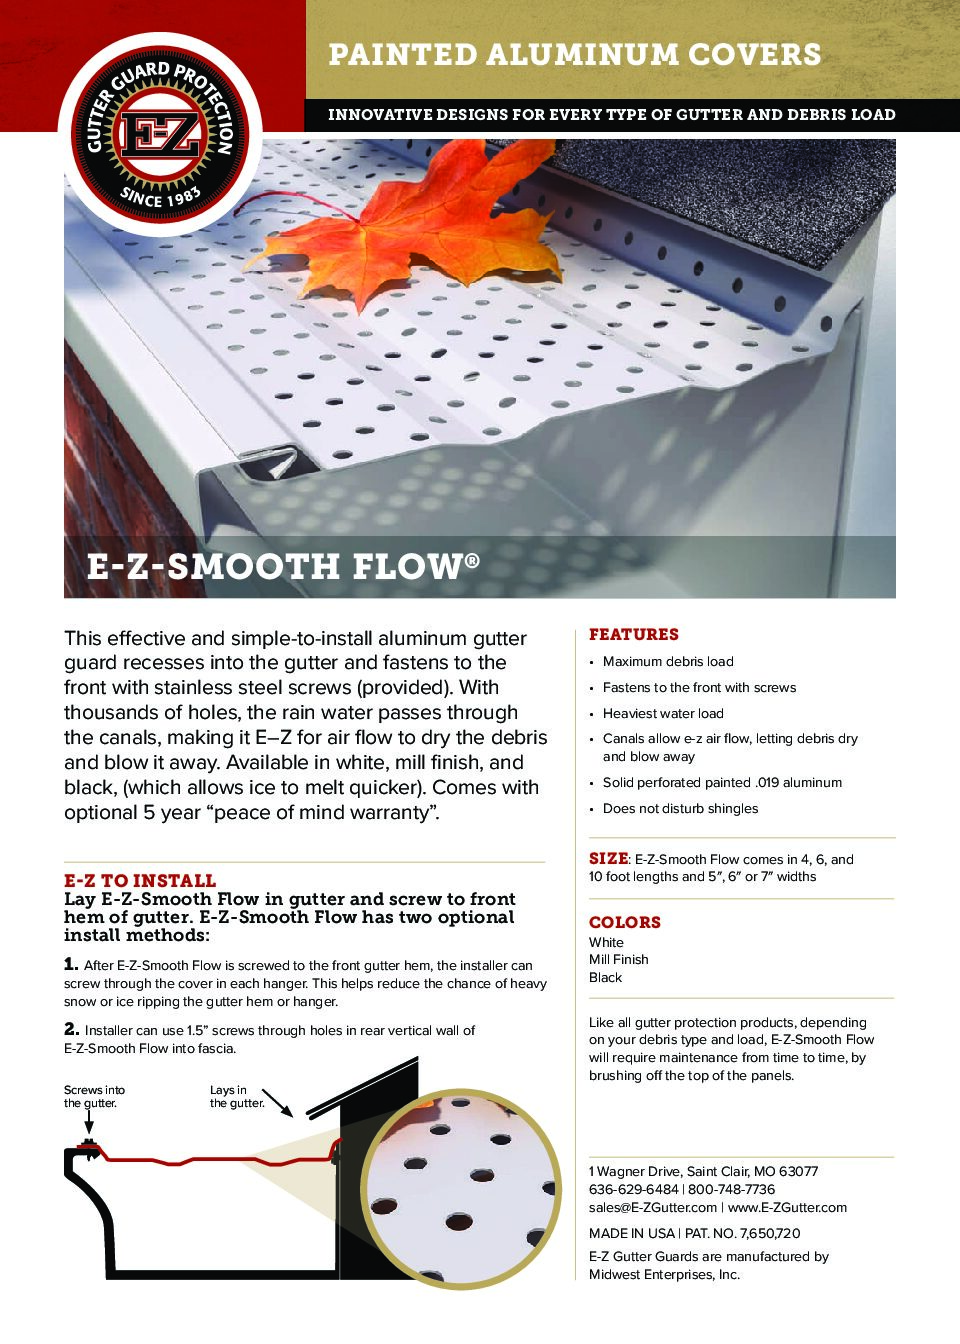 E-Z_Gutter_Sheets_SmoothFlow (2)